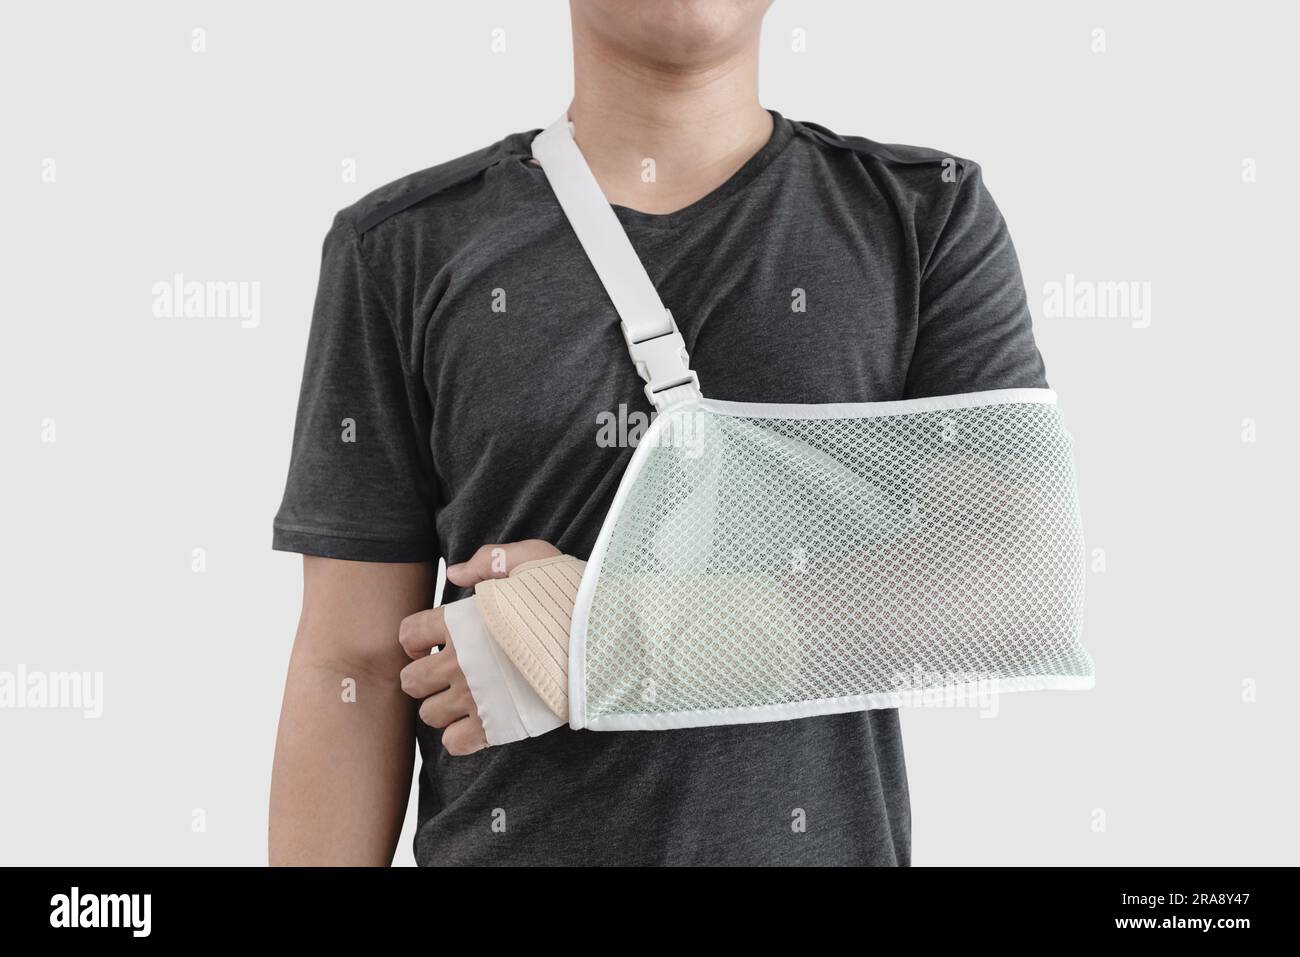 Young man with hand injured wearing splint, broken arm, isolated on white background Stock Photo